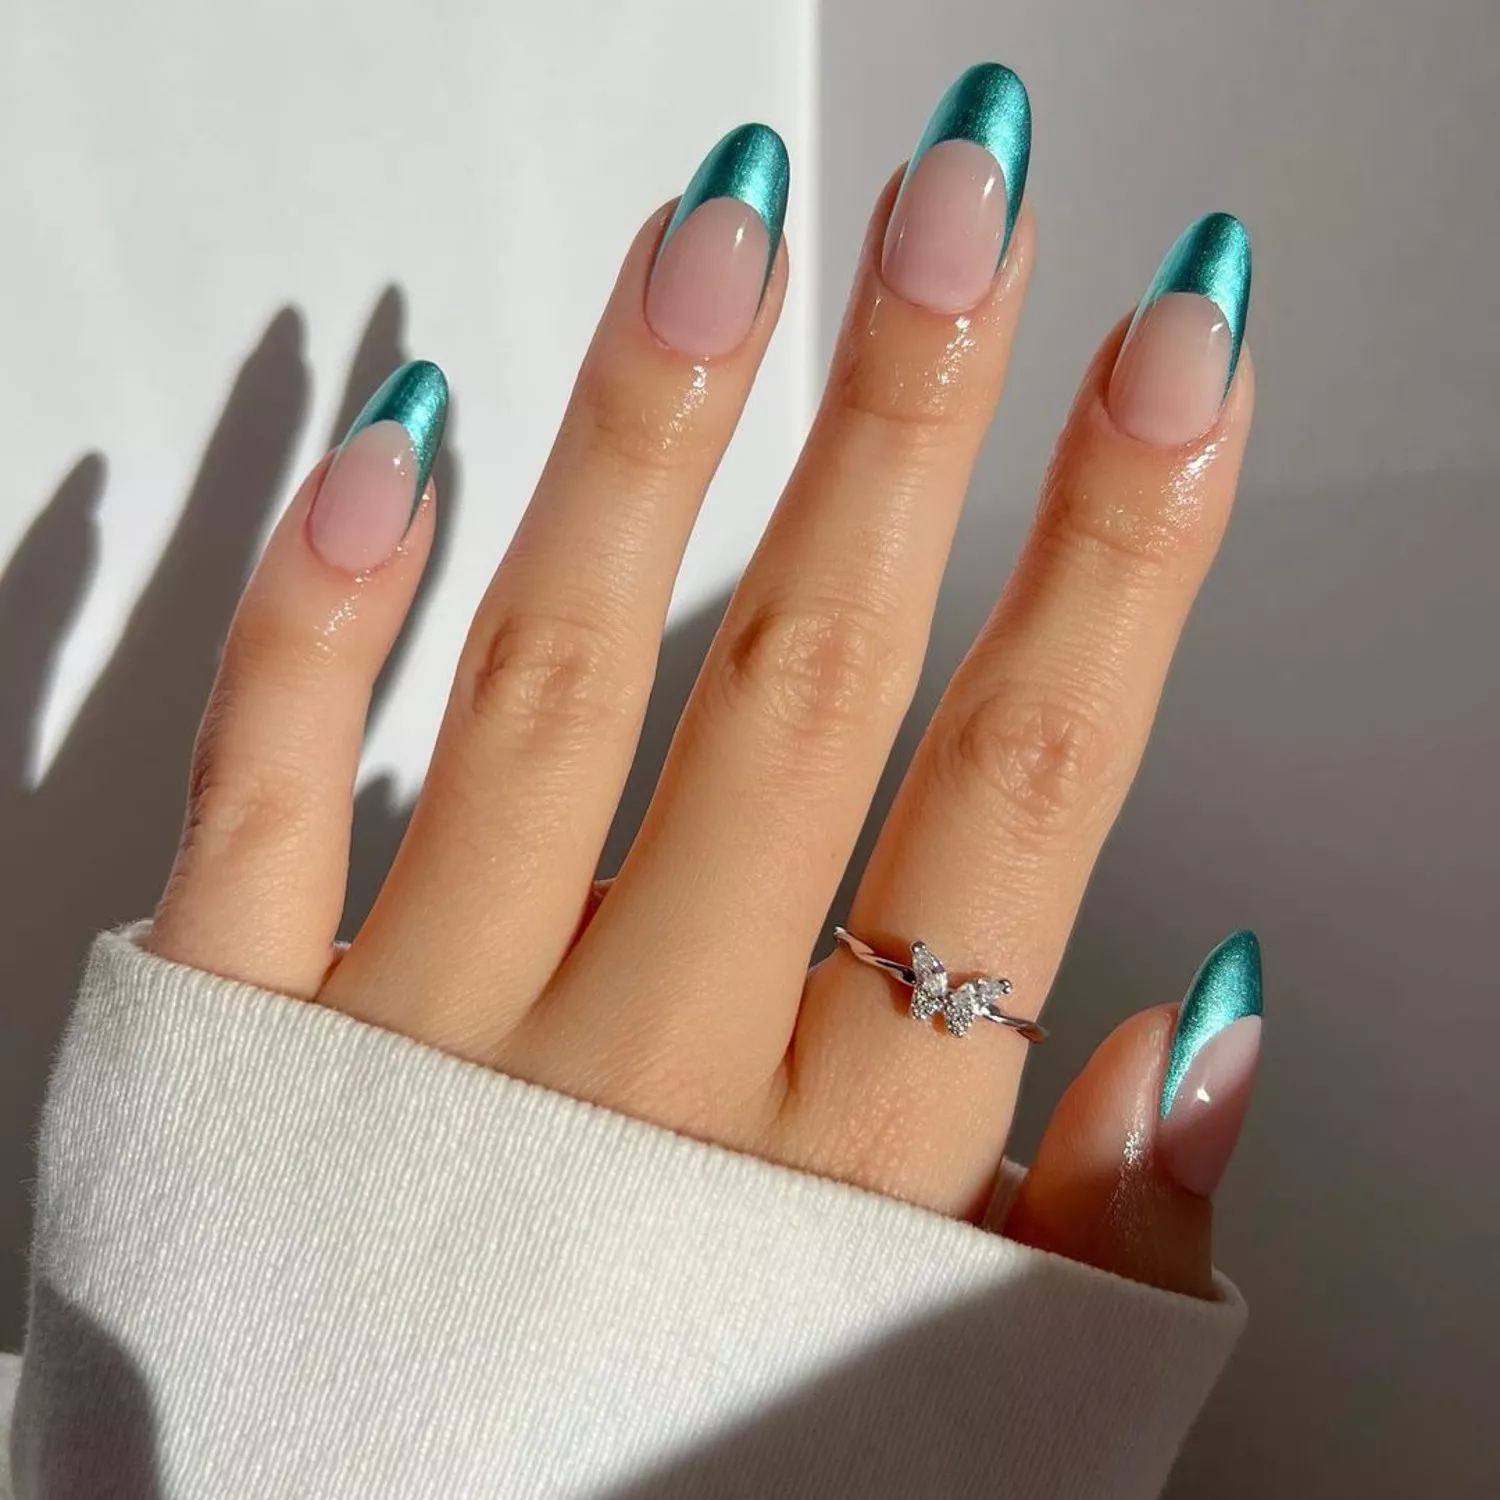 Manicure with mermaid teal metallic French tips